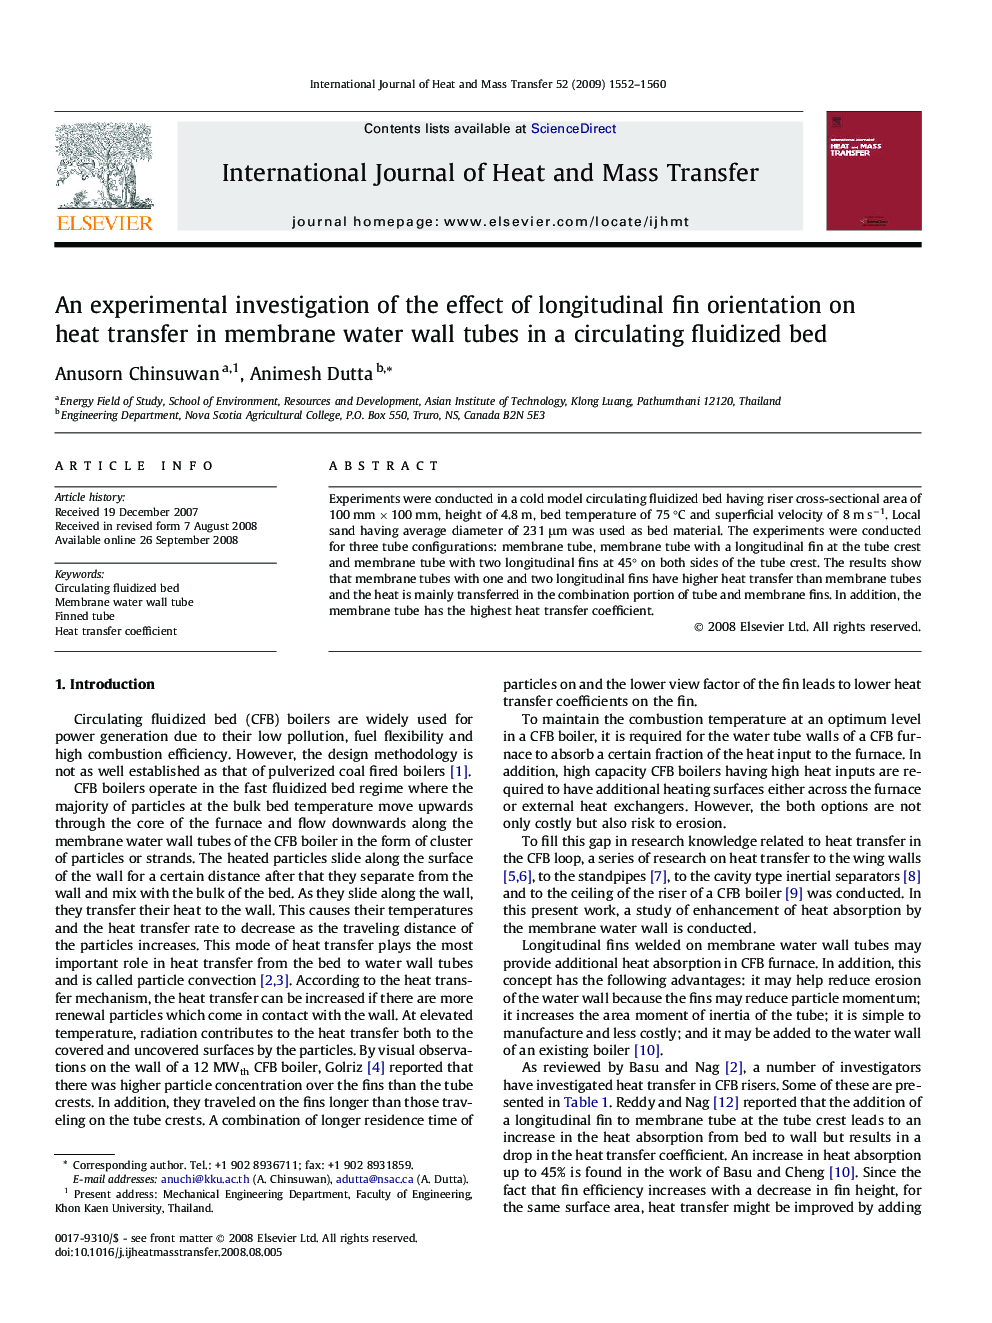 An experimental investigation of the effect of longitudinal fin orientation on heat transfer in membrane water wall tubes in a circulating fluidized bed